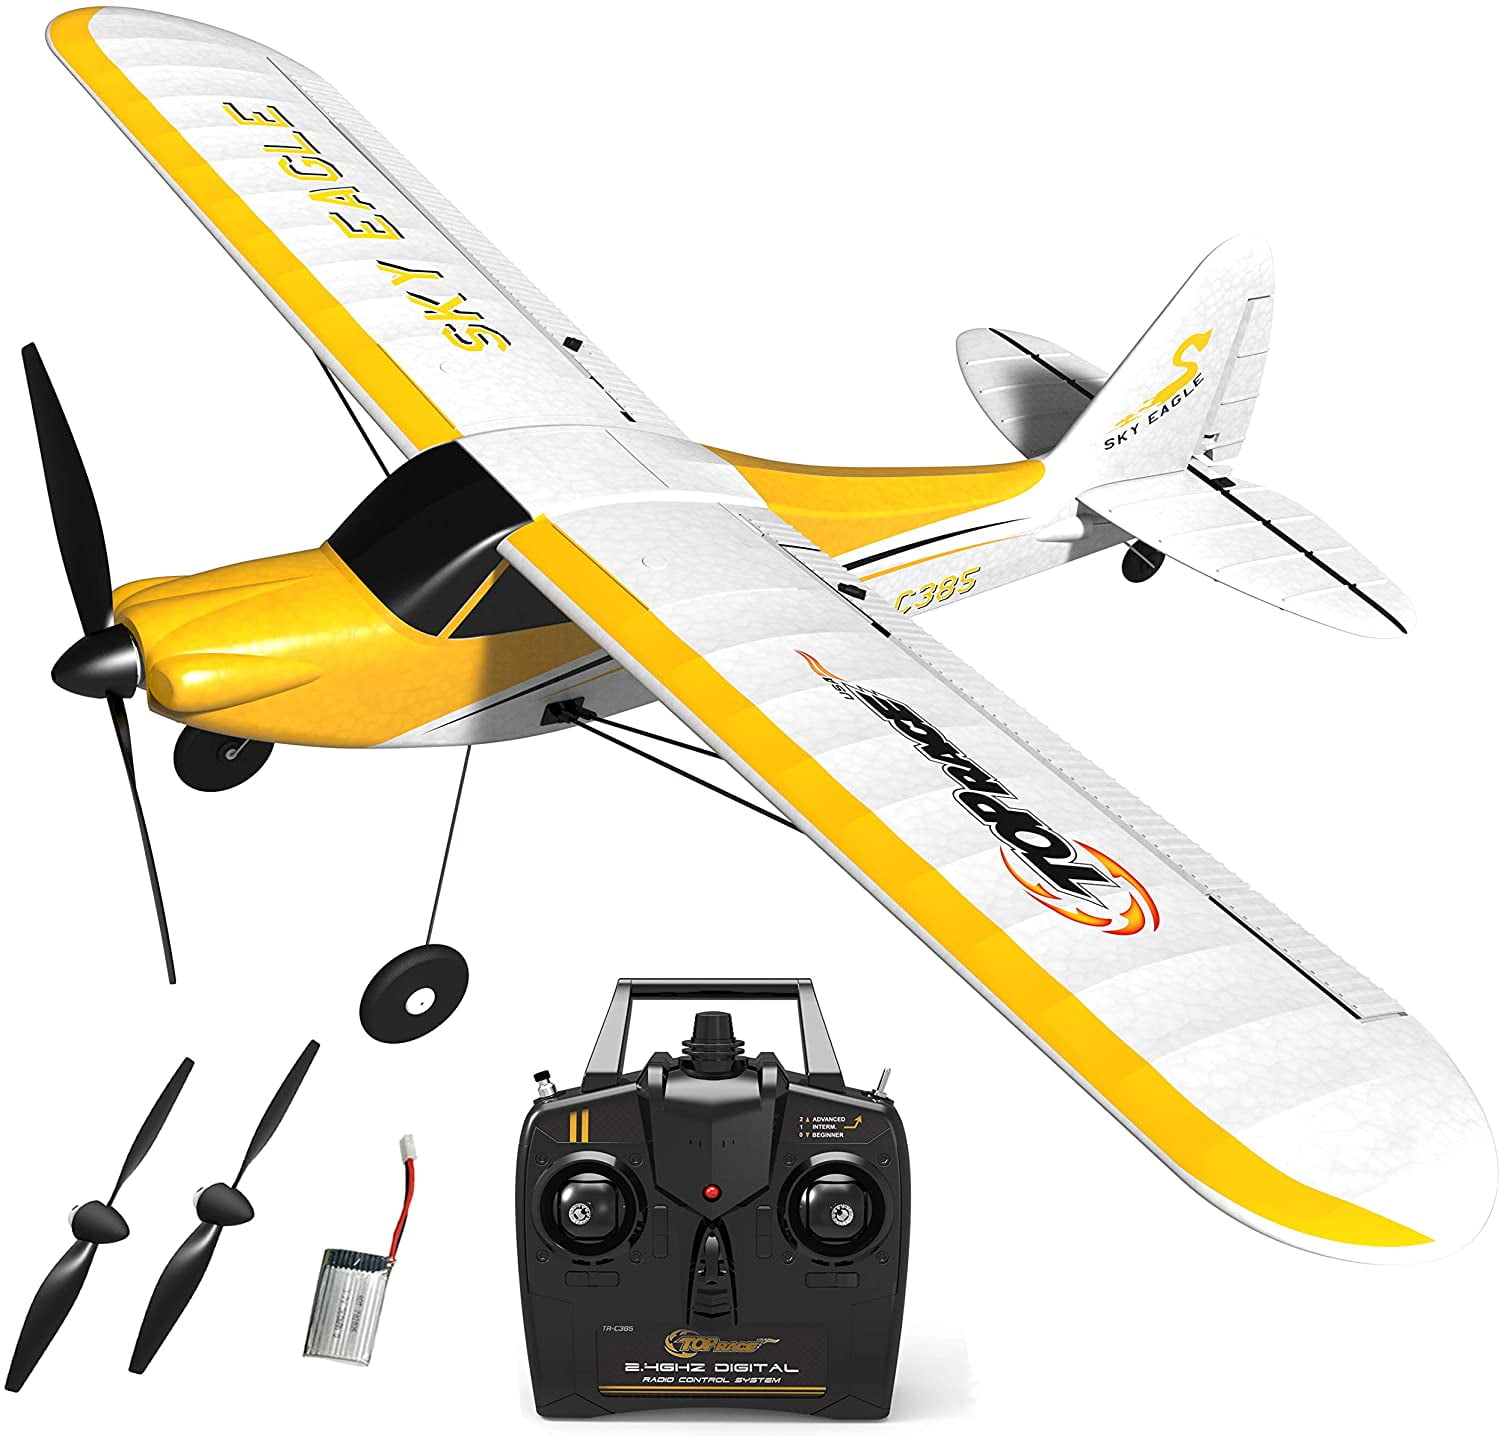 GoolRC A180 RC Airplane 2.4Ghz 2 Channel Remote Control Plane with 6 Axis Gyro System Adjustable Rudder Brushless Motor and 1 Batteries Easy to Fly RTF Foam RC Aircraft for Adults